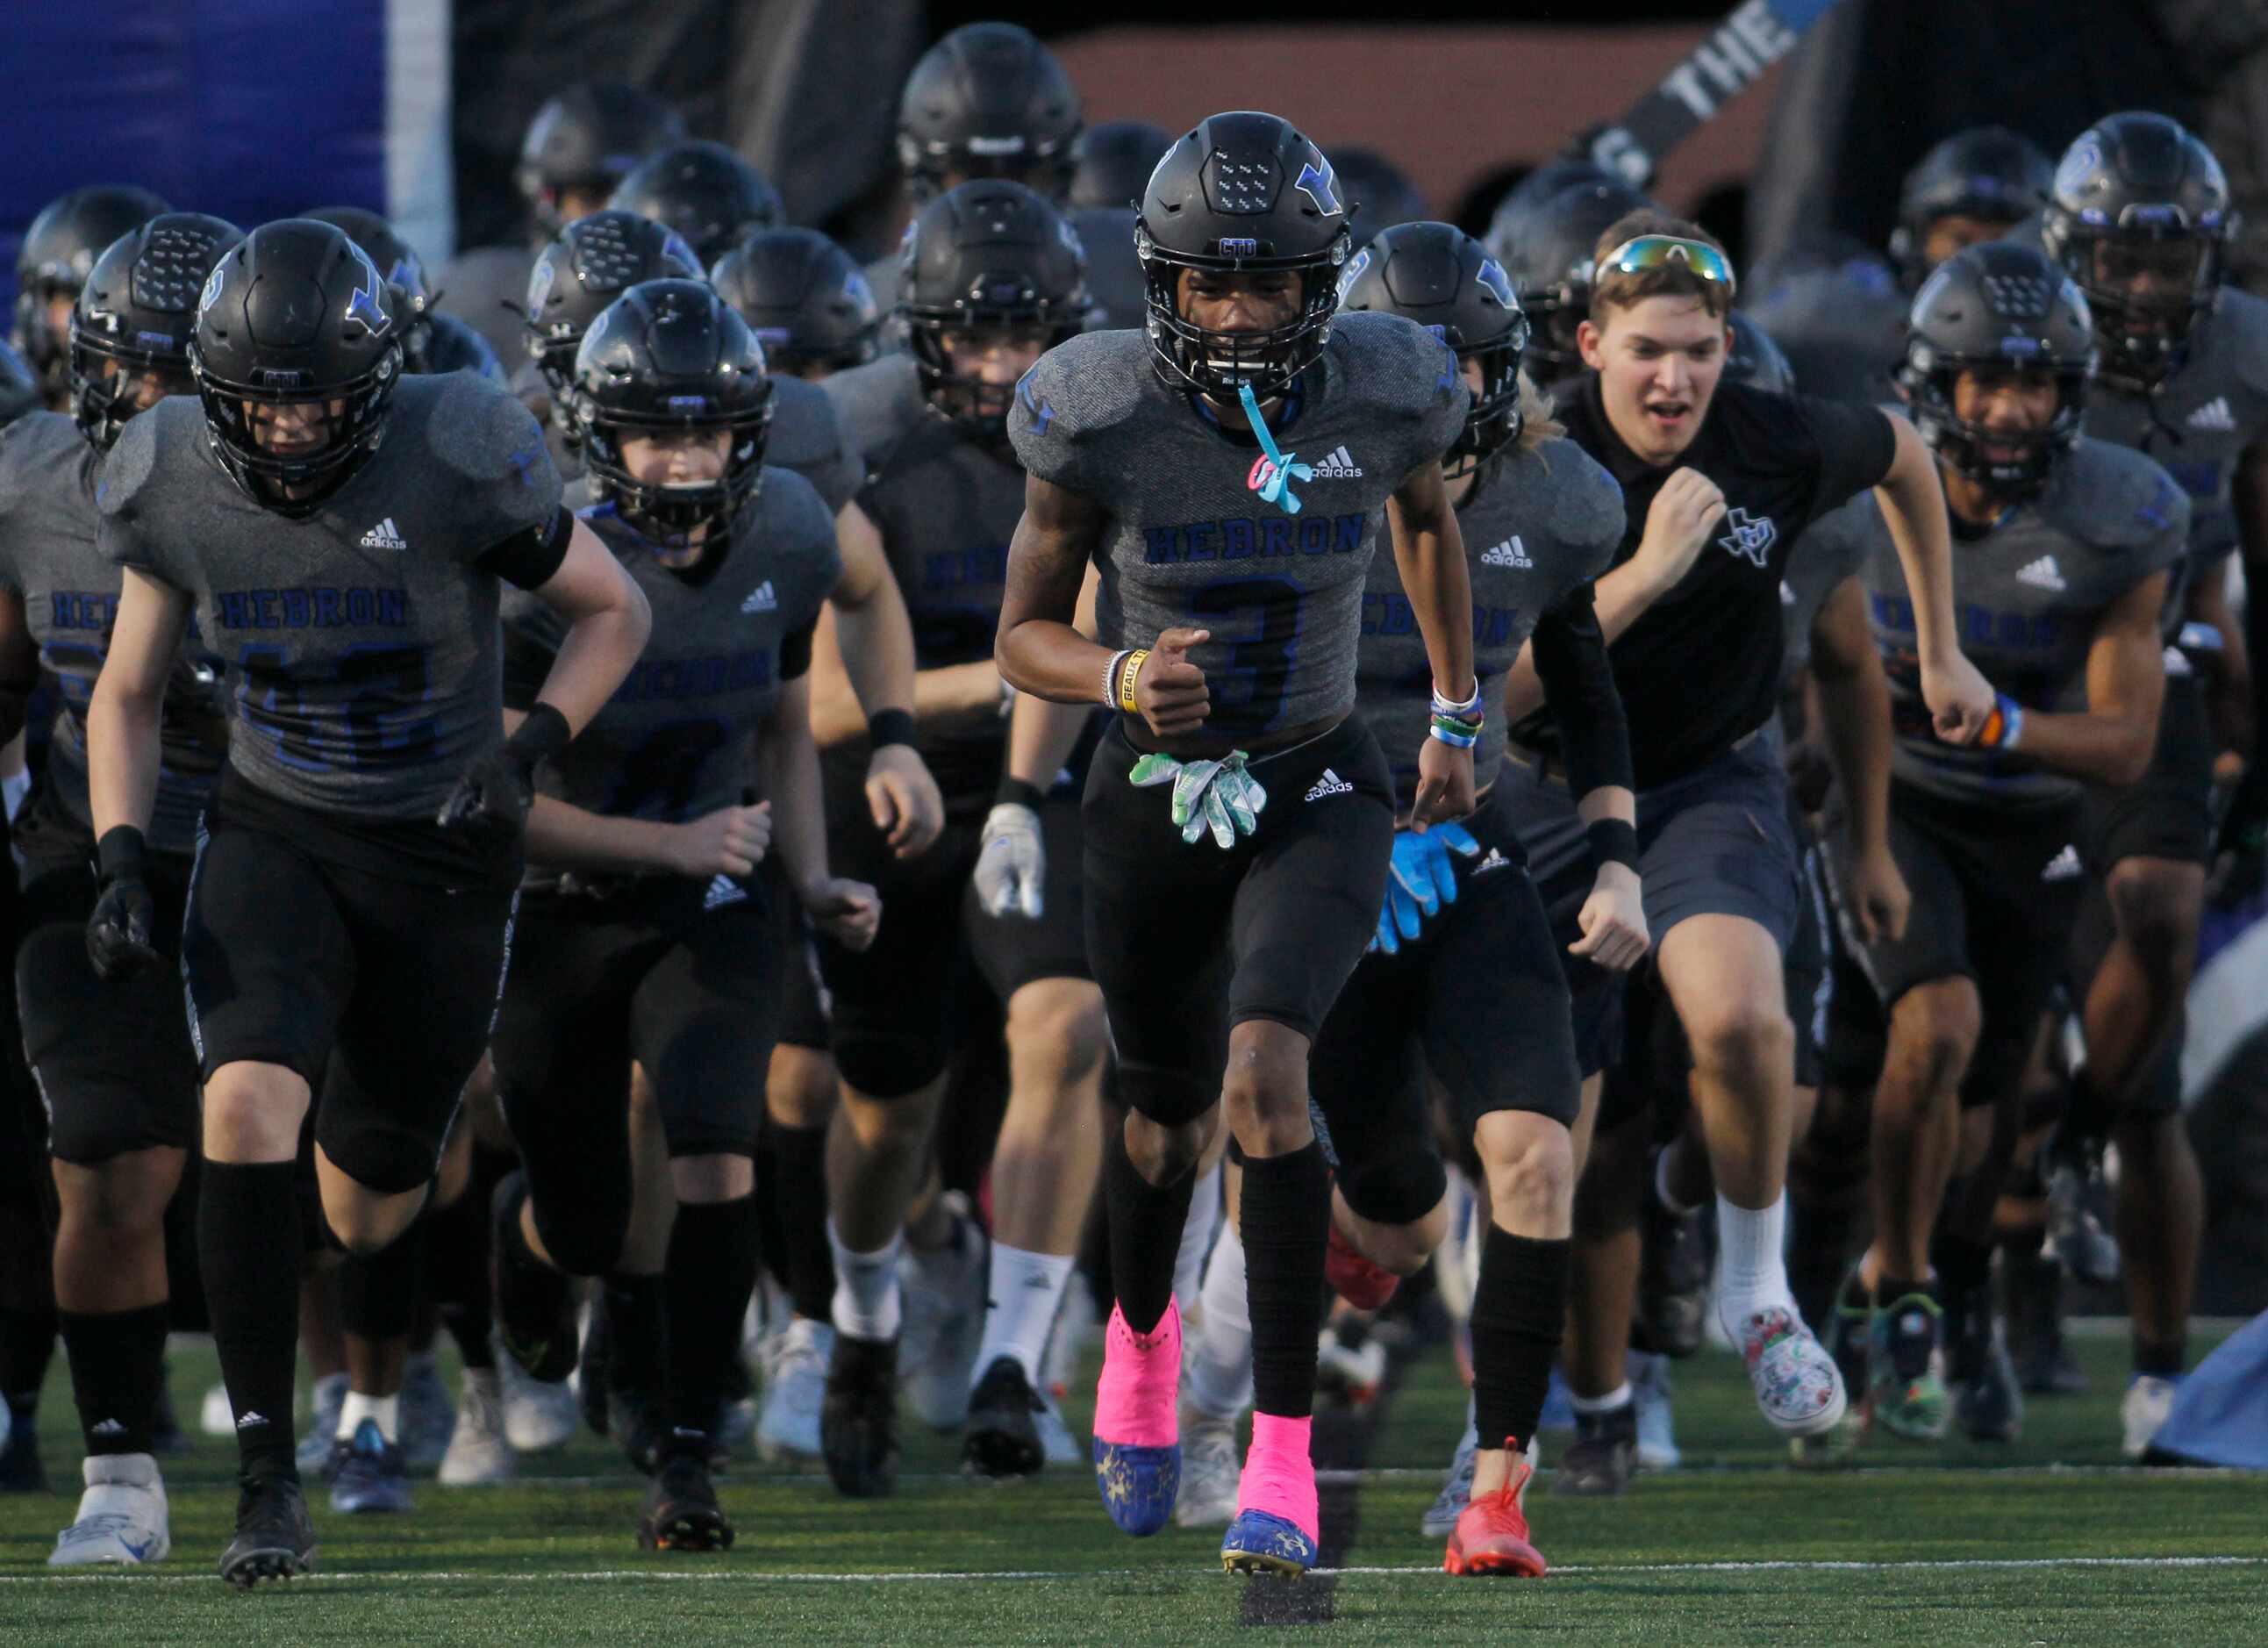 Hebron Hawks players race onto the field prior to the opening kickoff of their game against...